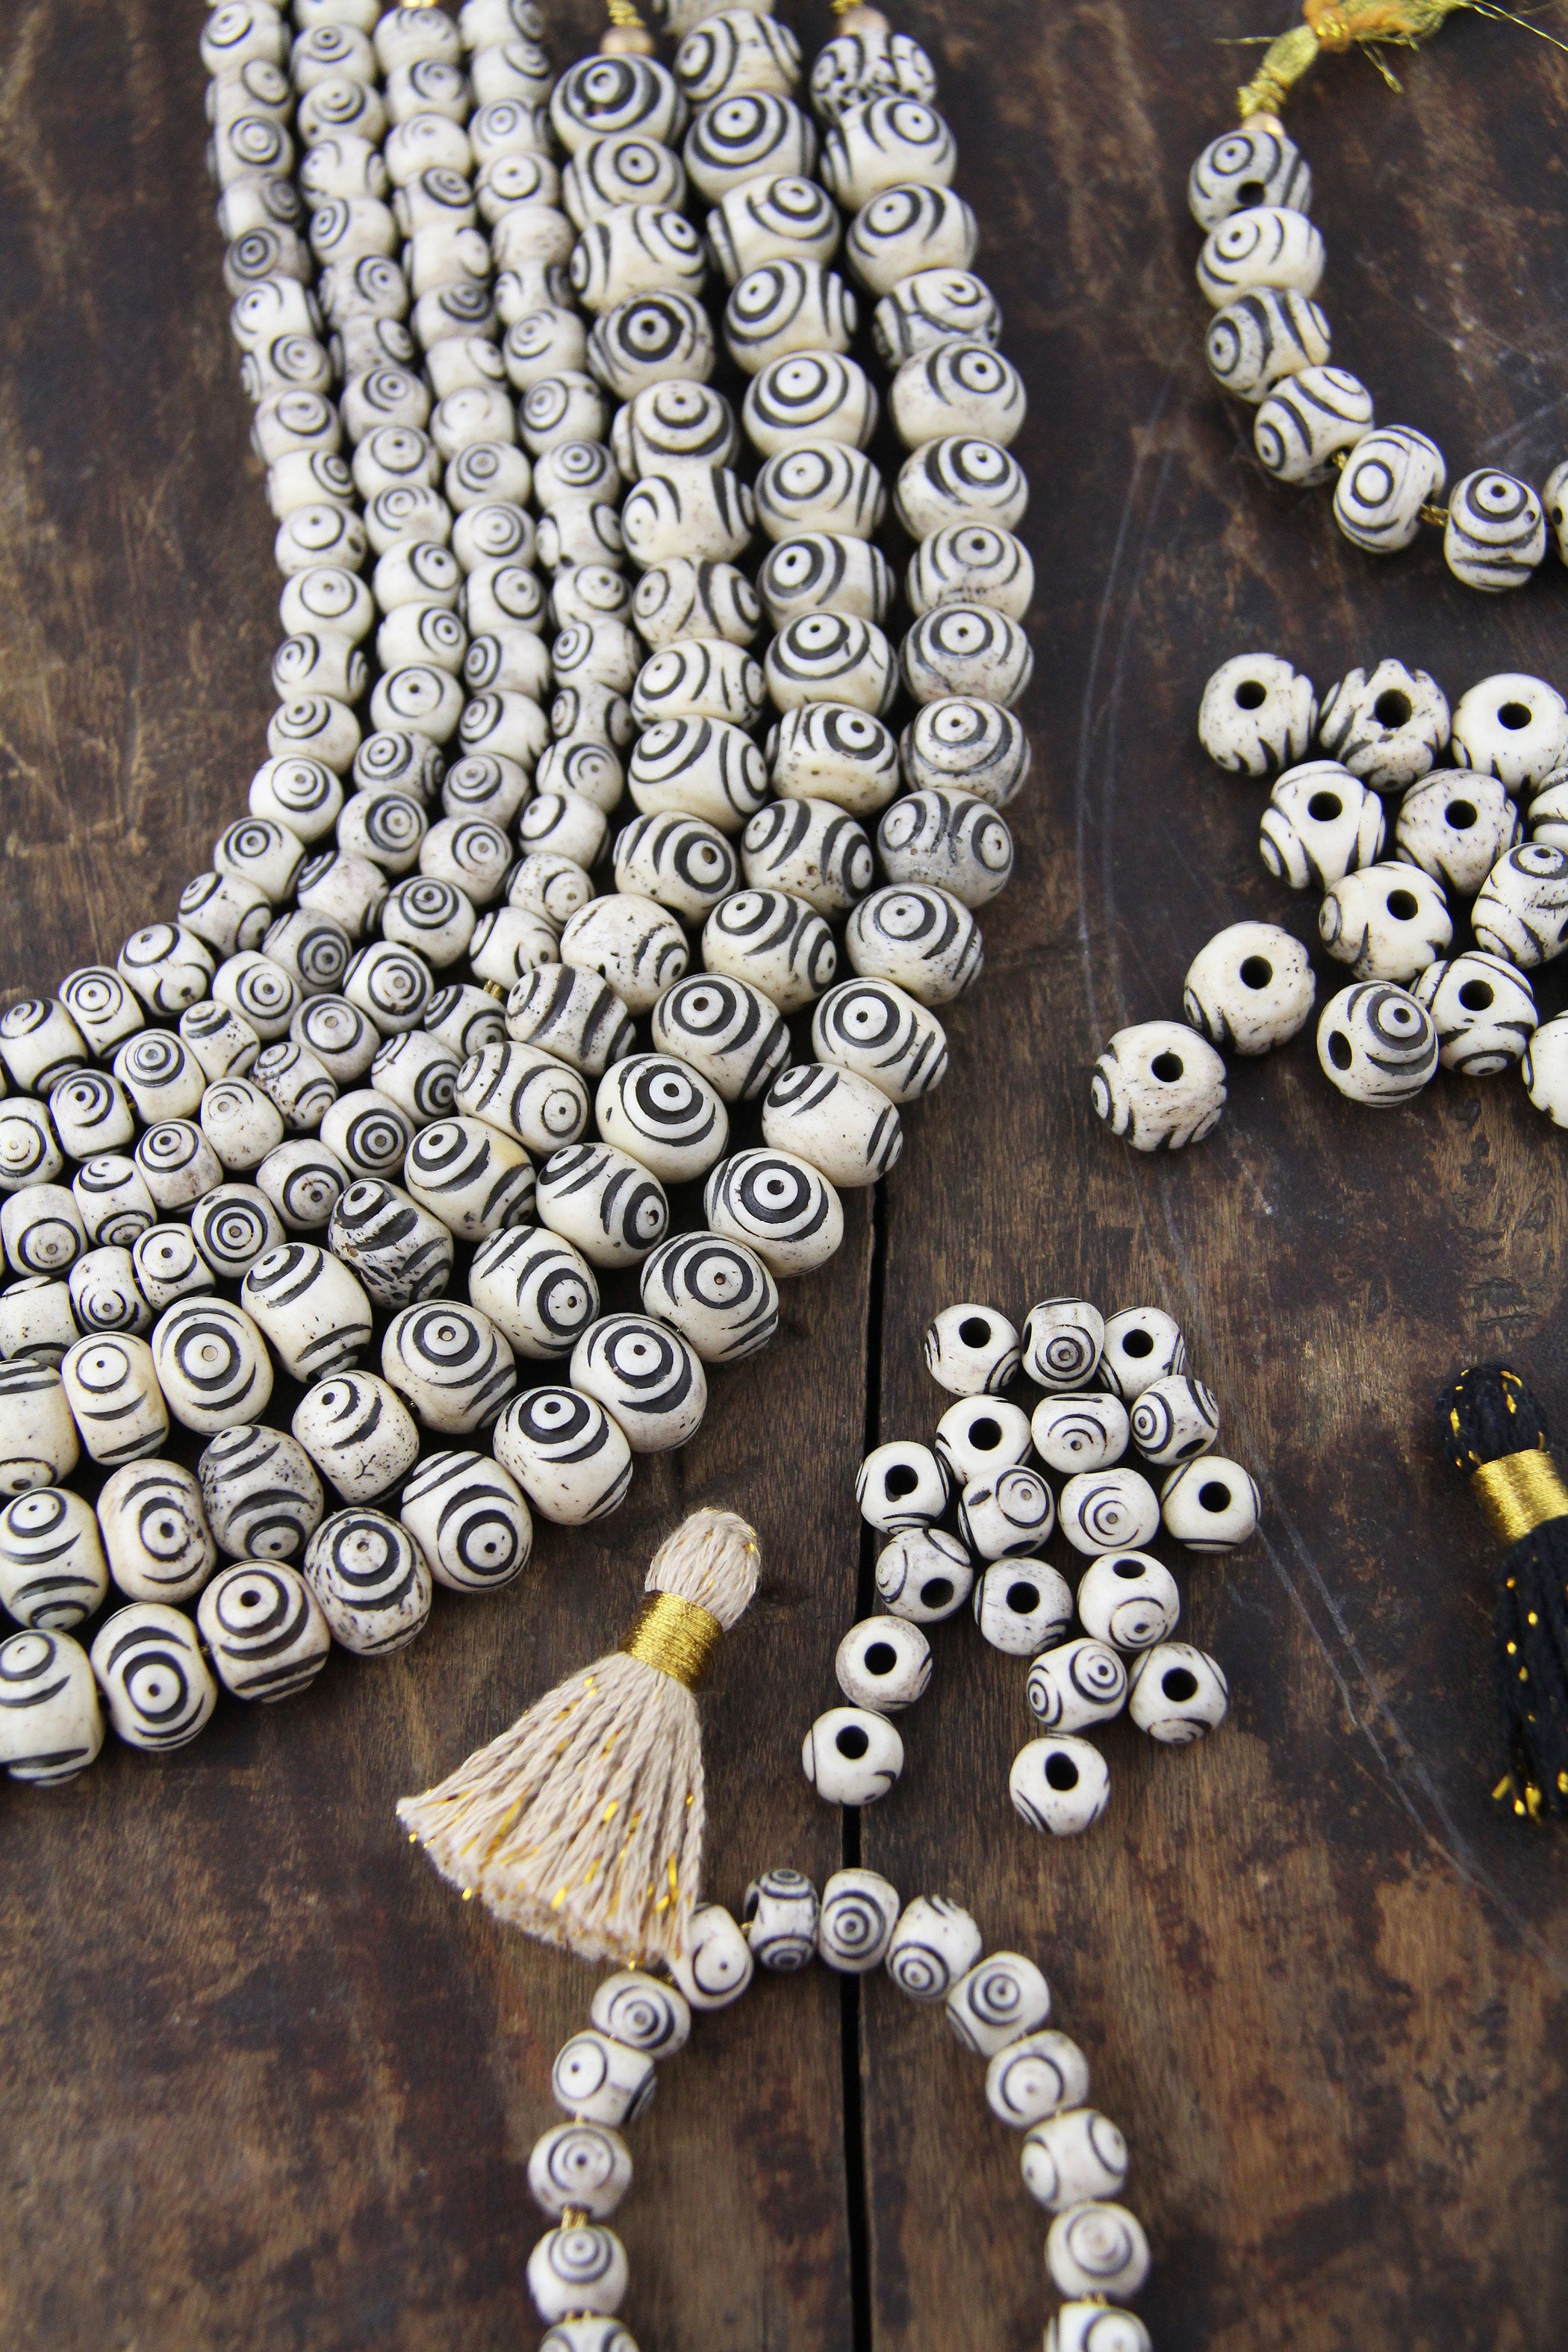 Black Cubed Bullseye: Hand Carved Bone Beads, 8x7mm, 27 pieces